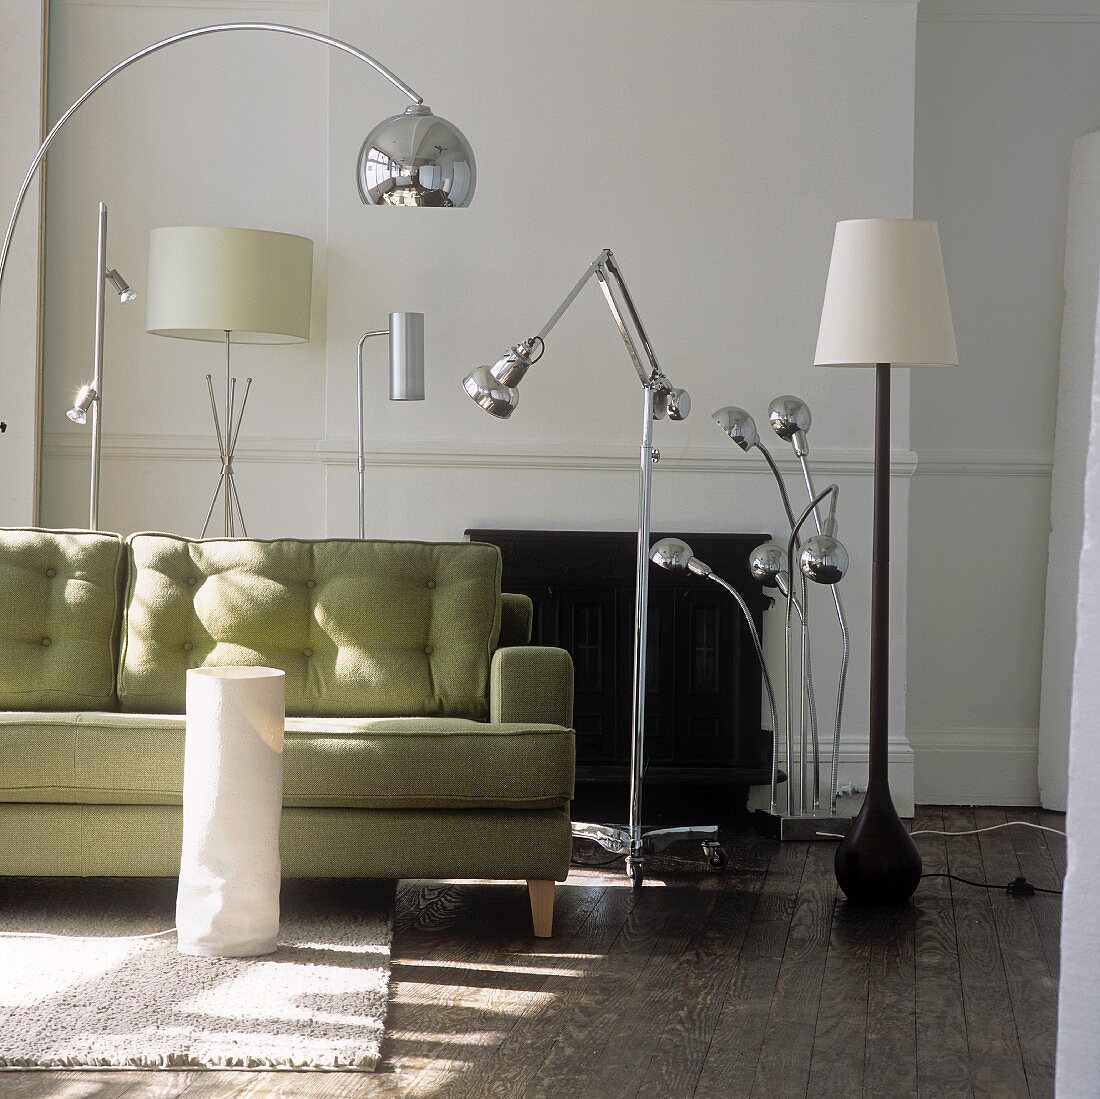 A collection of floor lamps displaying a range of materials and style and a sofa in front of a fireplace